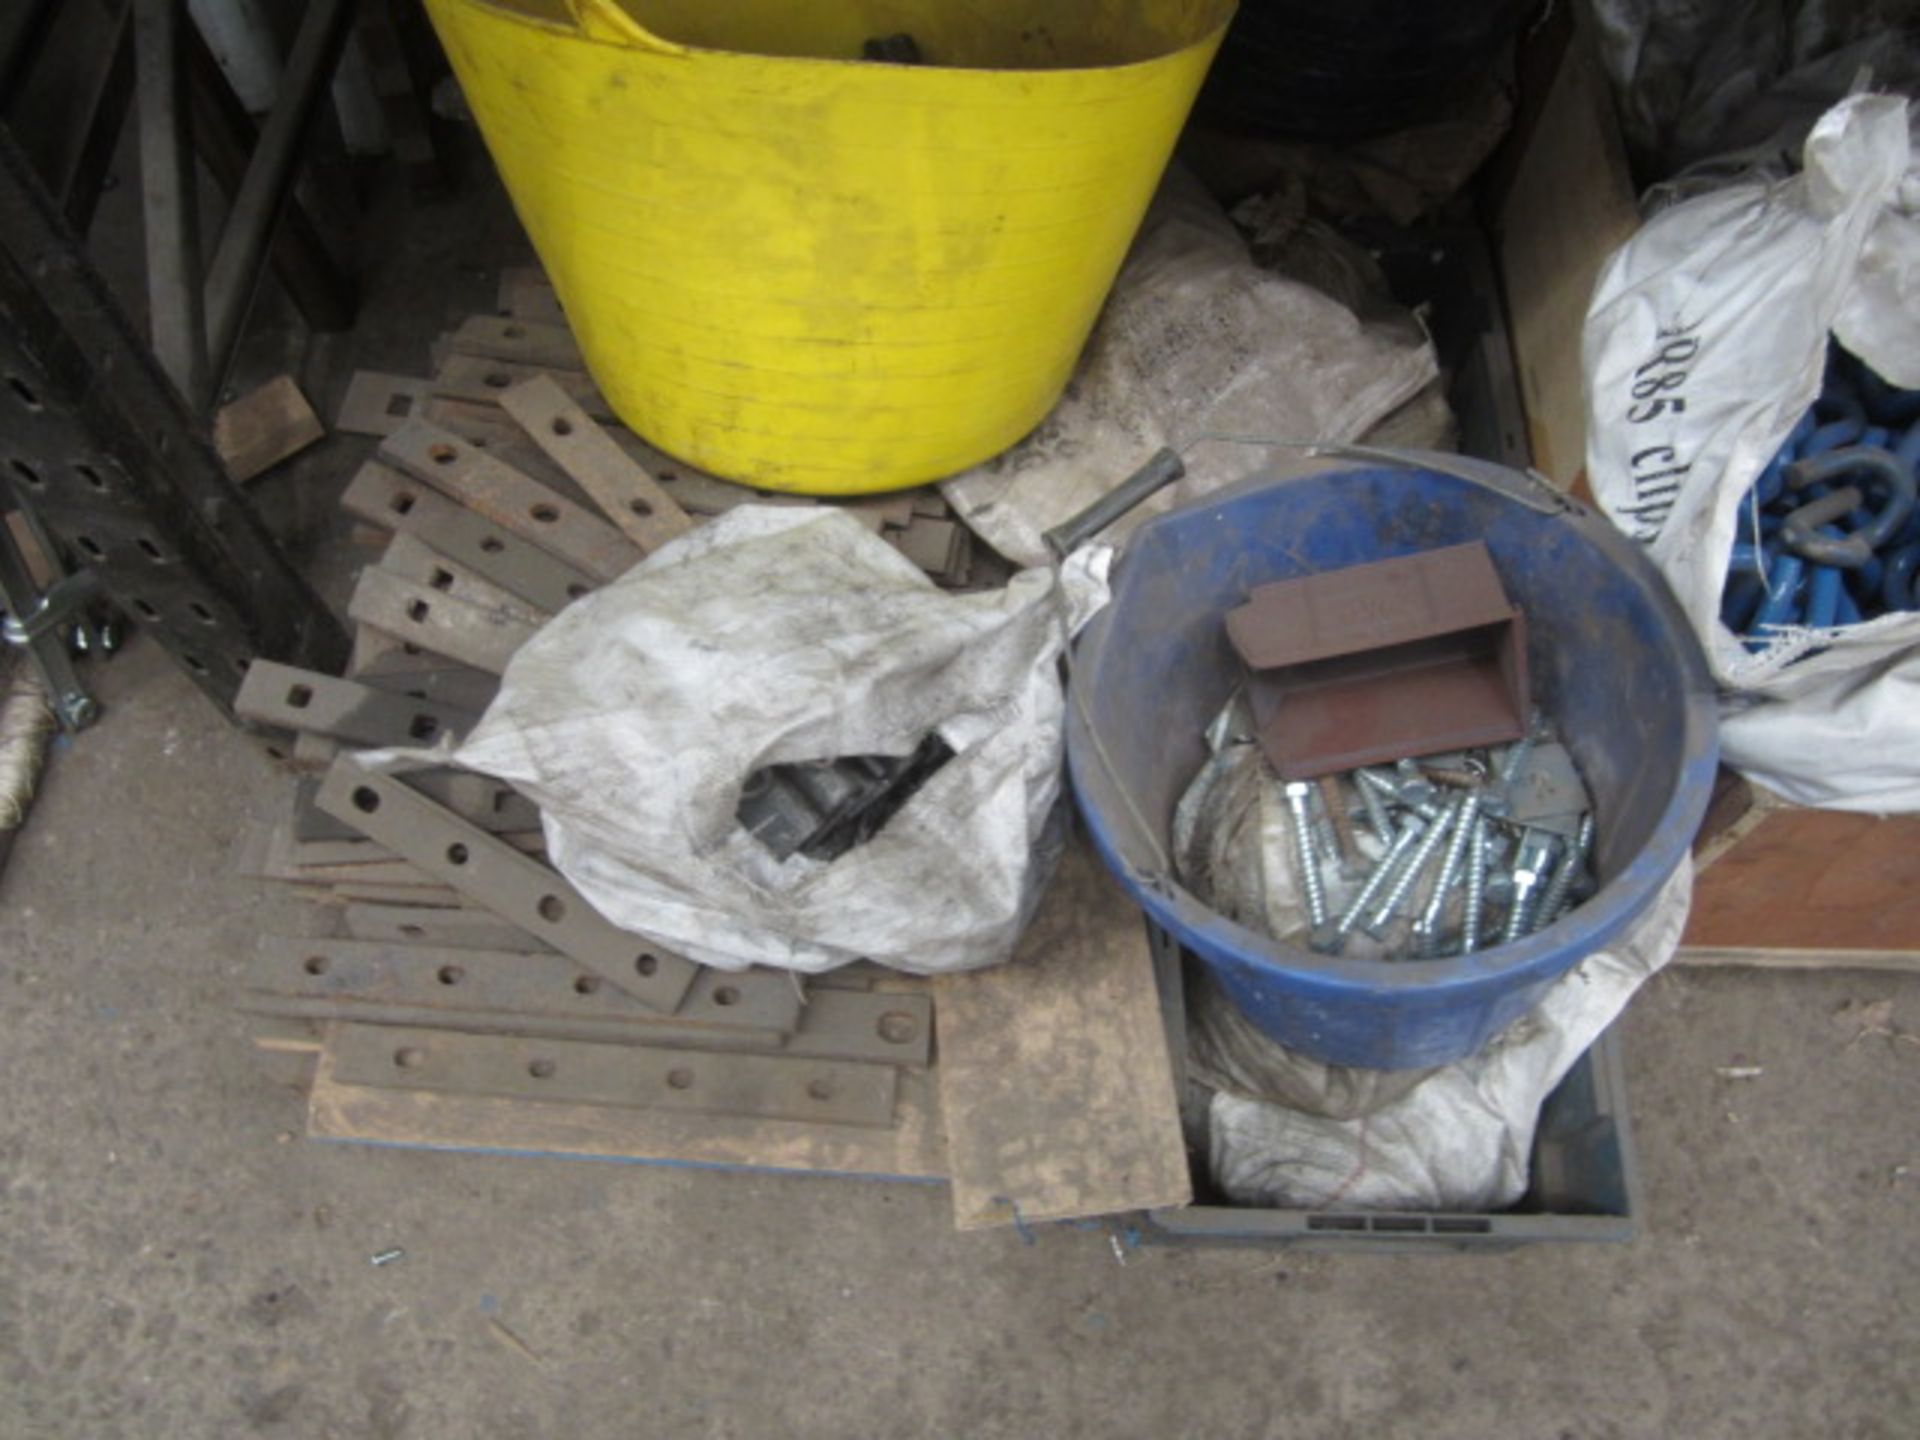 Contents of bay of racking including steel profiles, heavy duty bolts, metal clips etc., as lotted - - Image 4 of 19